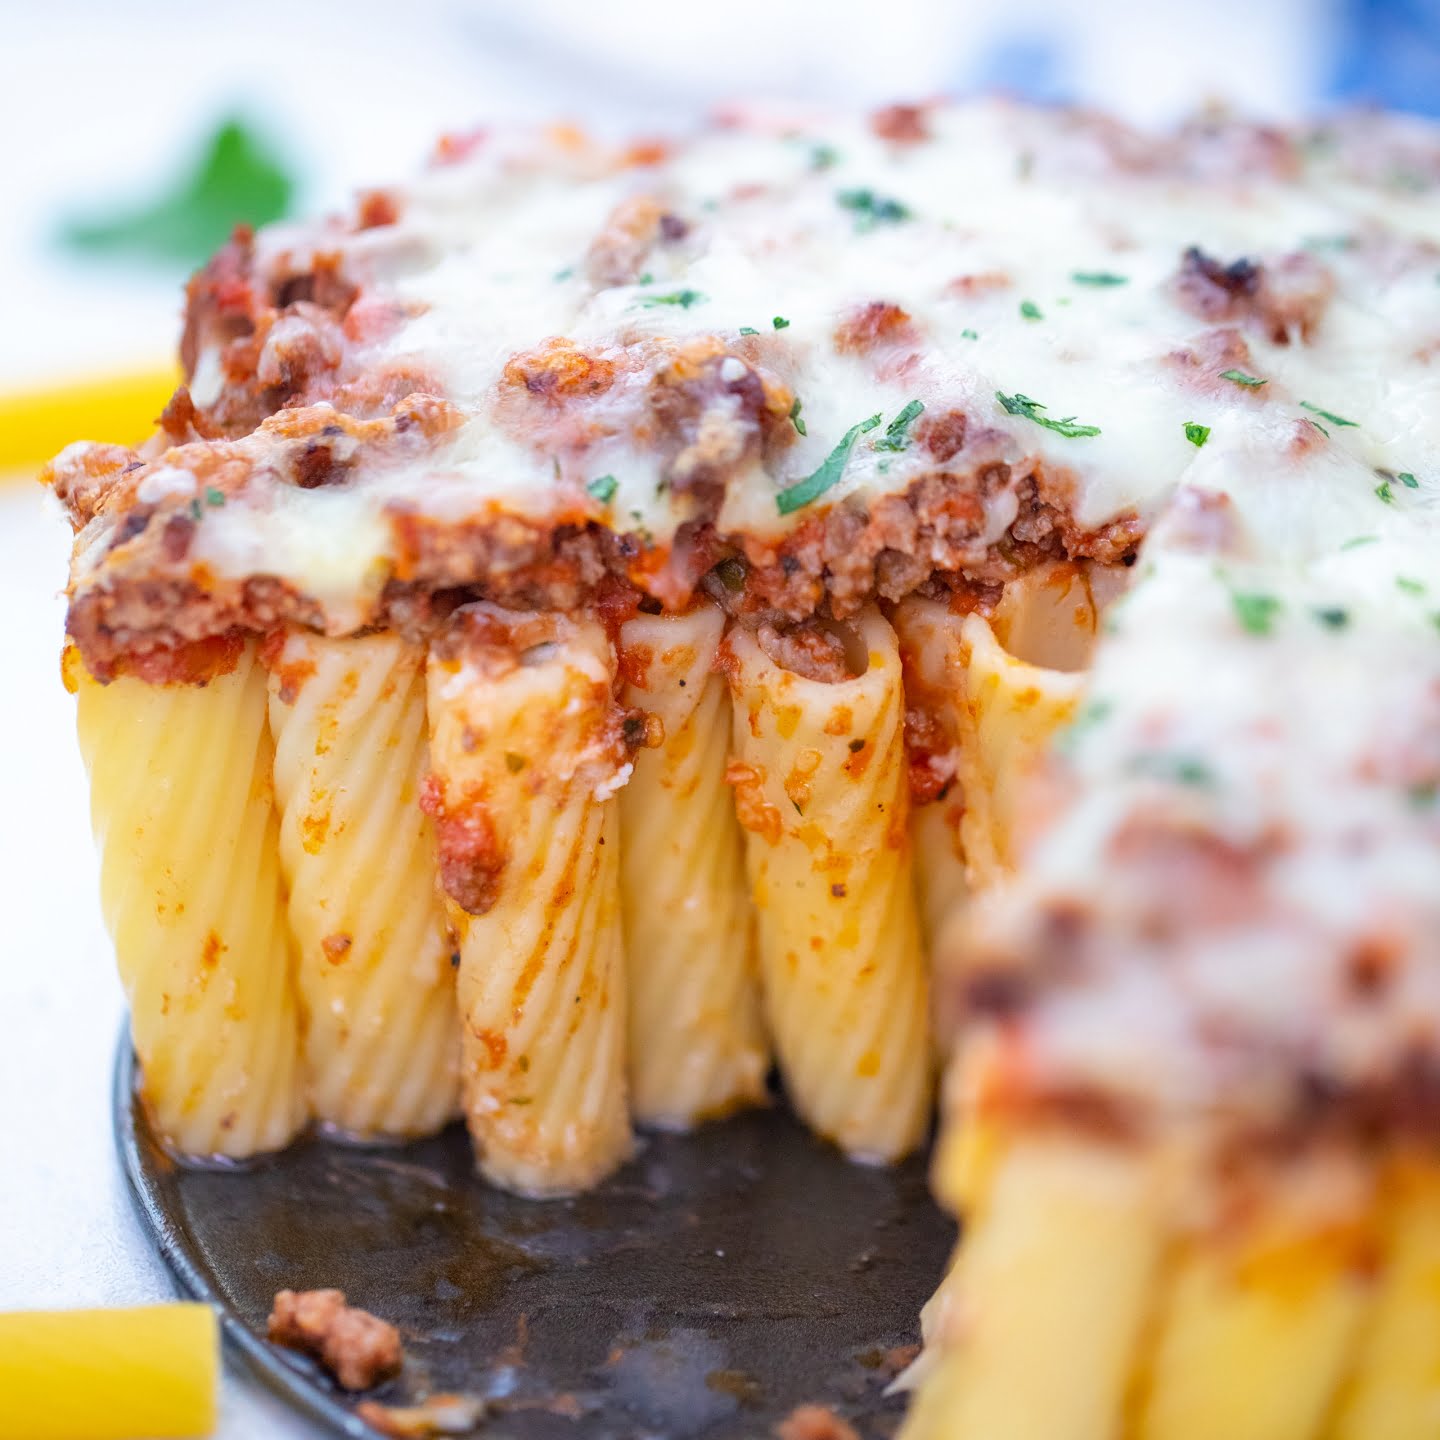 stuffed rigatoni with ground beef and cheese on top